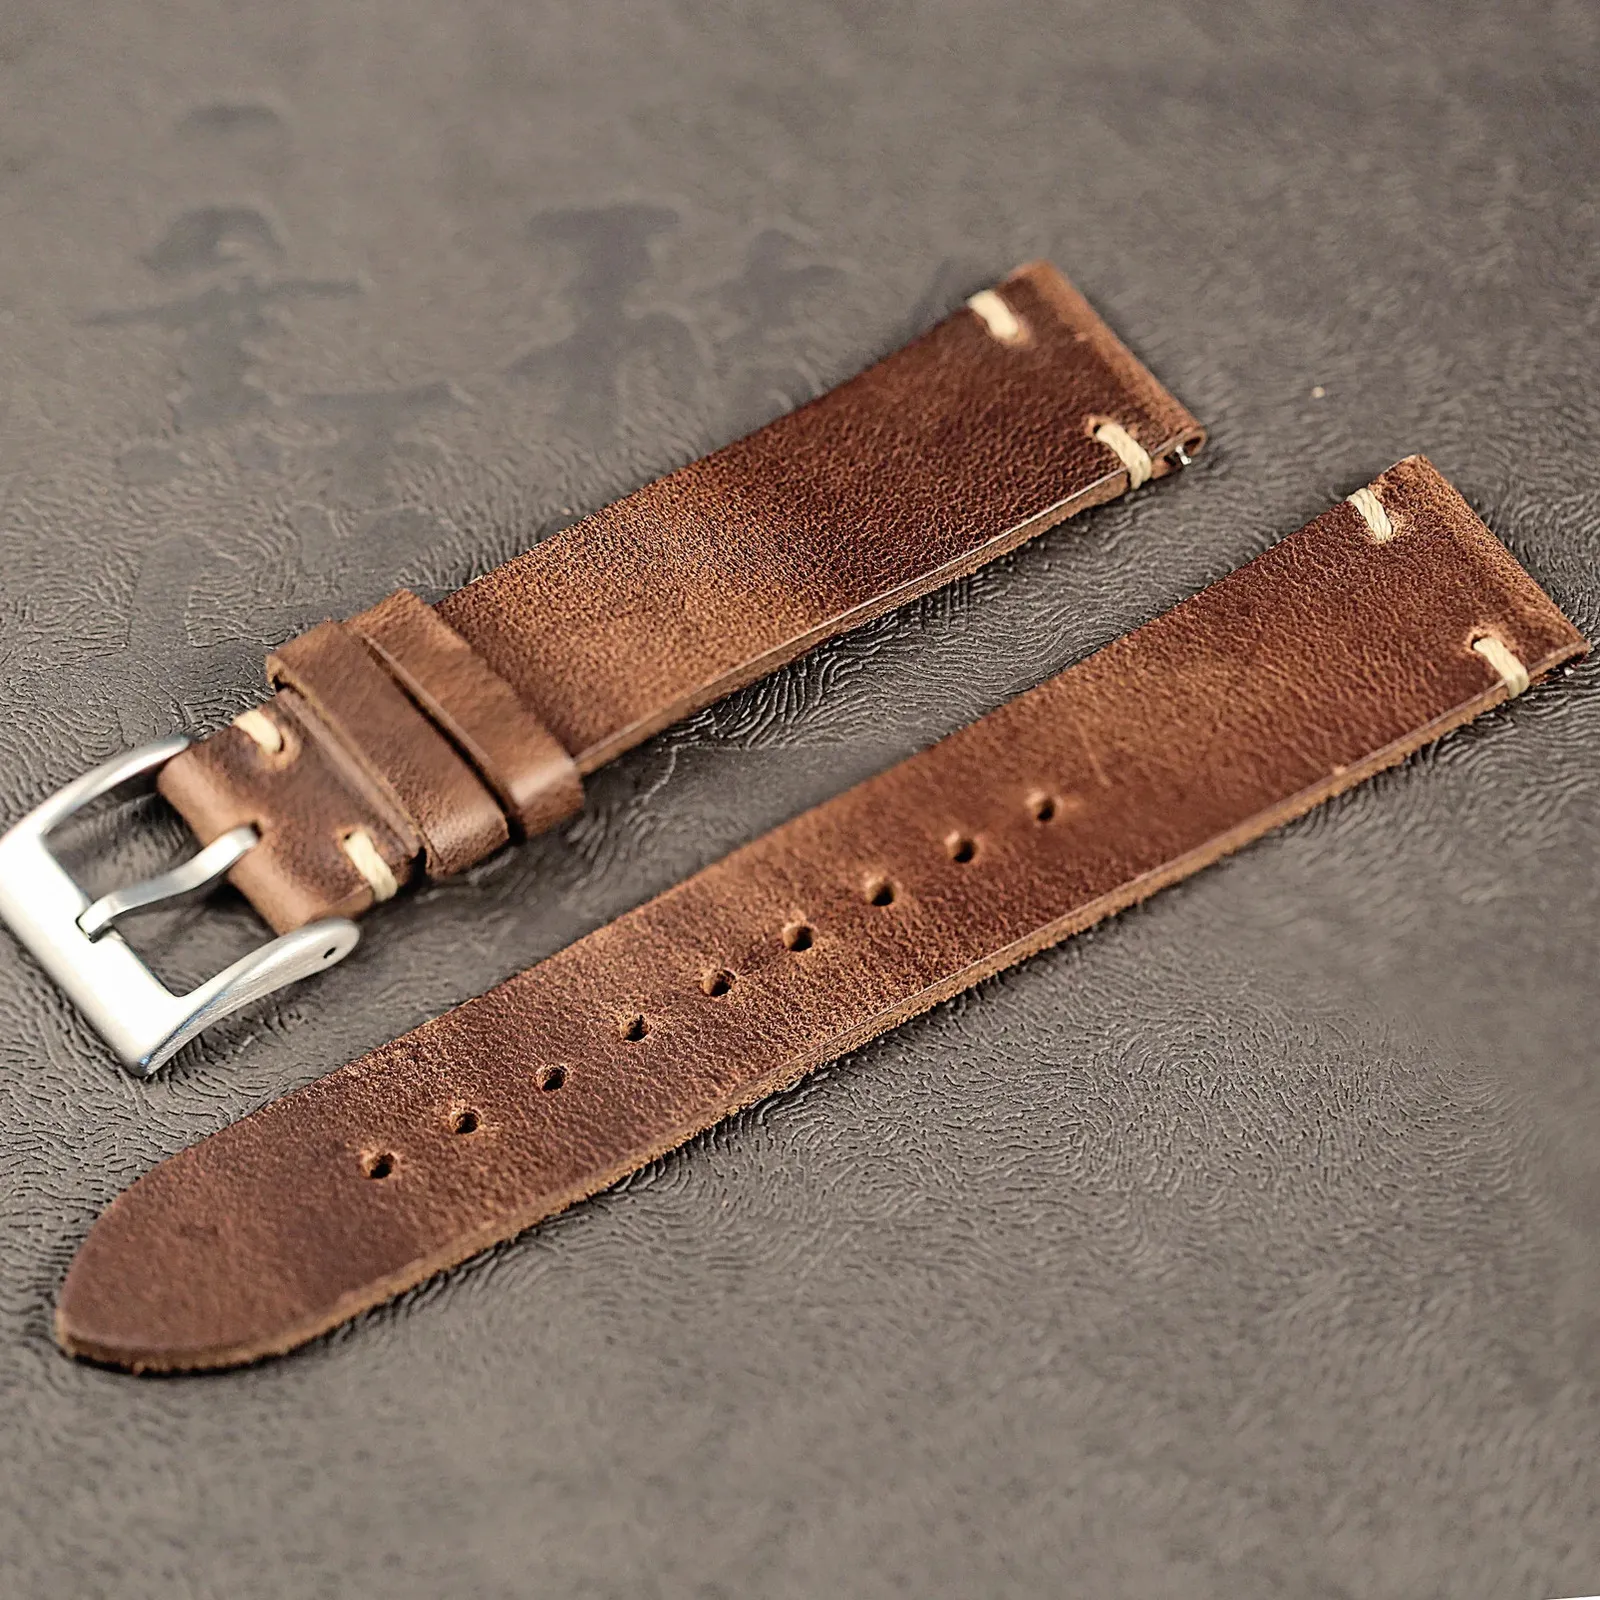 Horween US Chromexcel Leather Watch Bands Natural Soft Wrap Handmade Leather Straps 18mm 20mm 22mm 240320